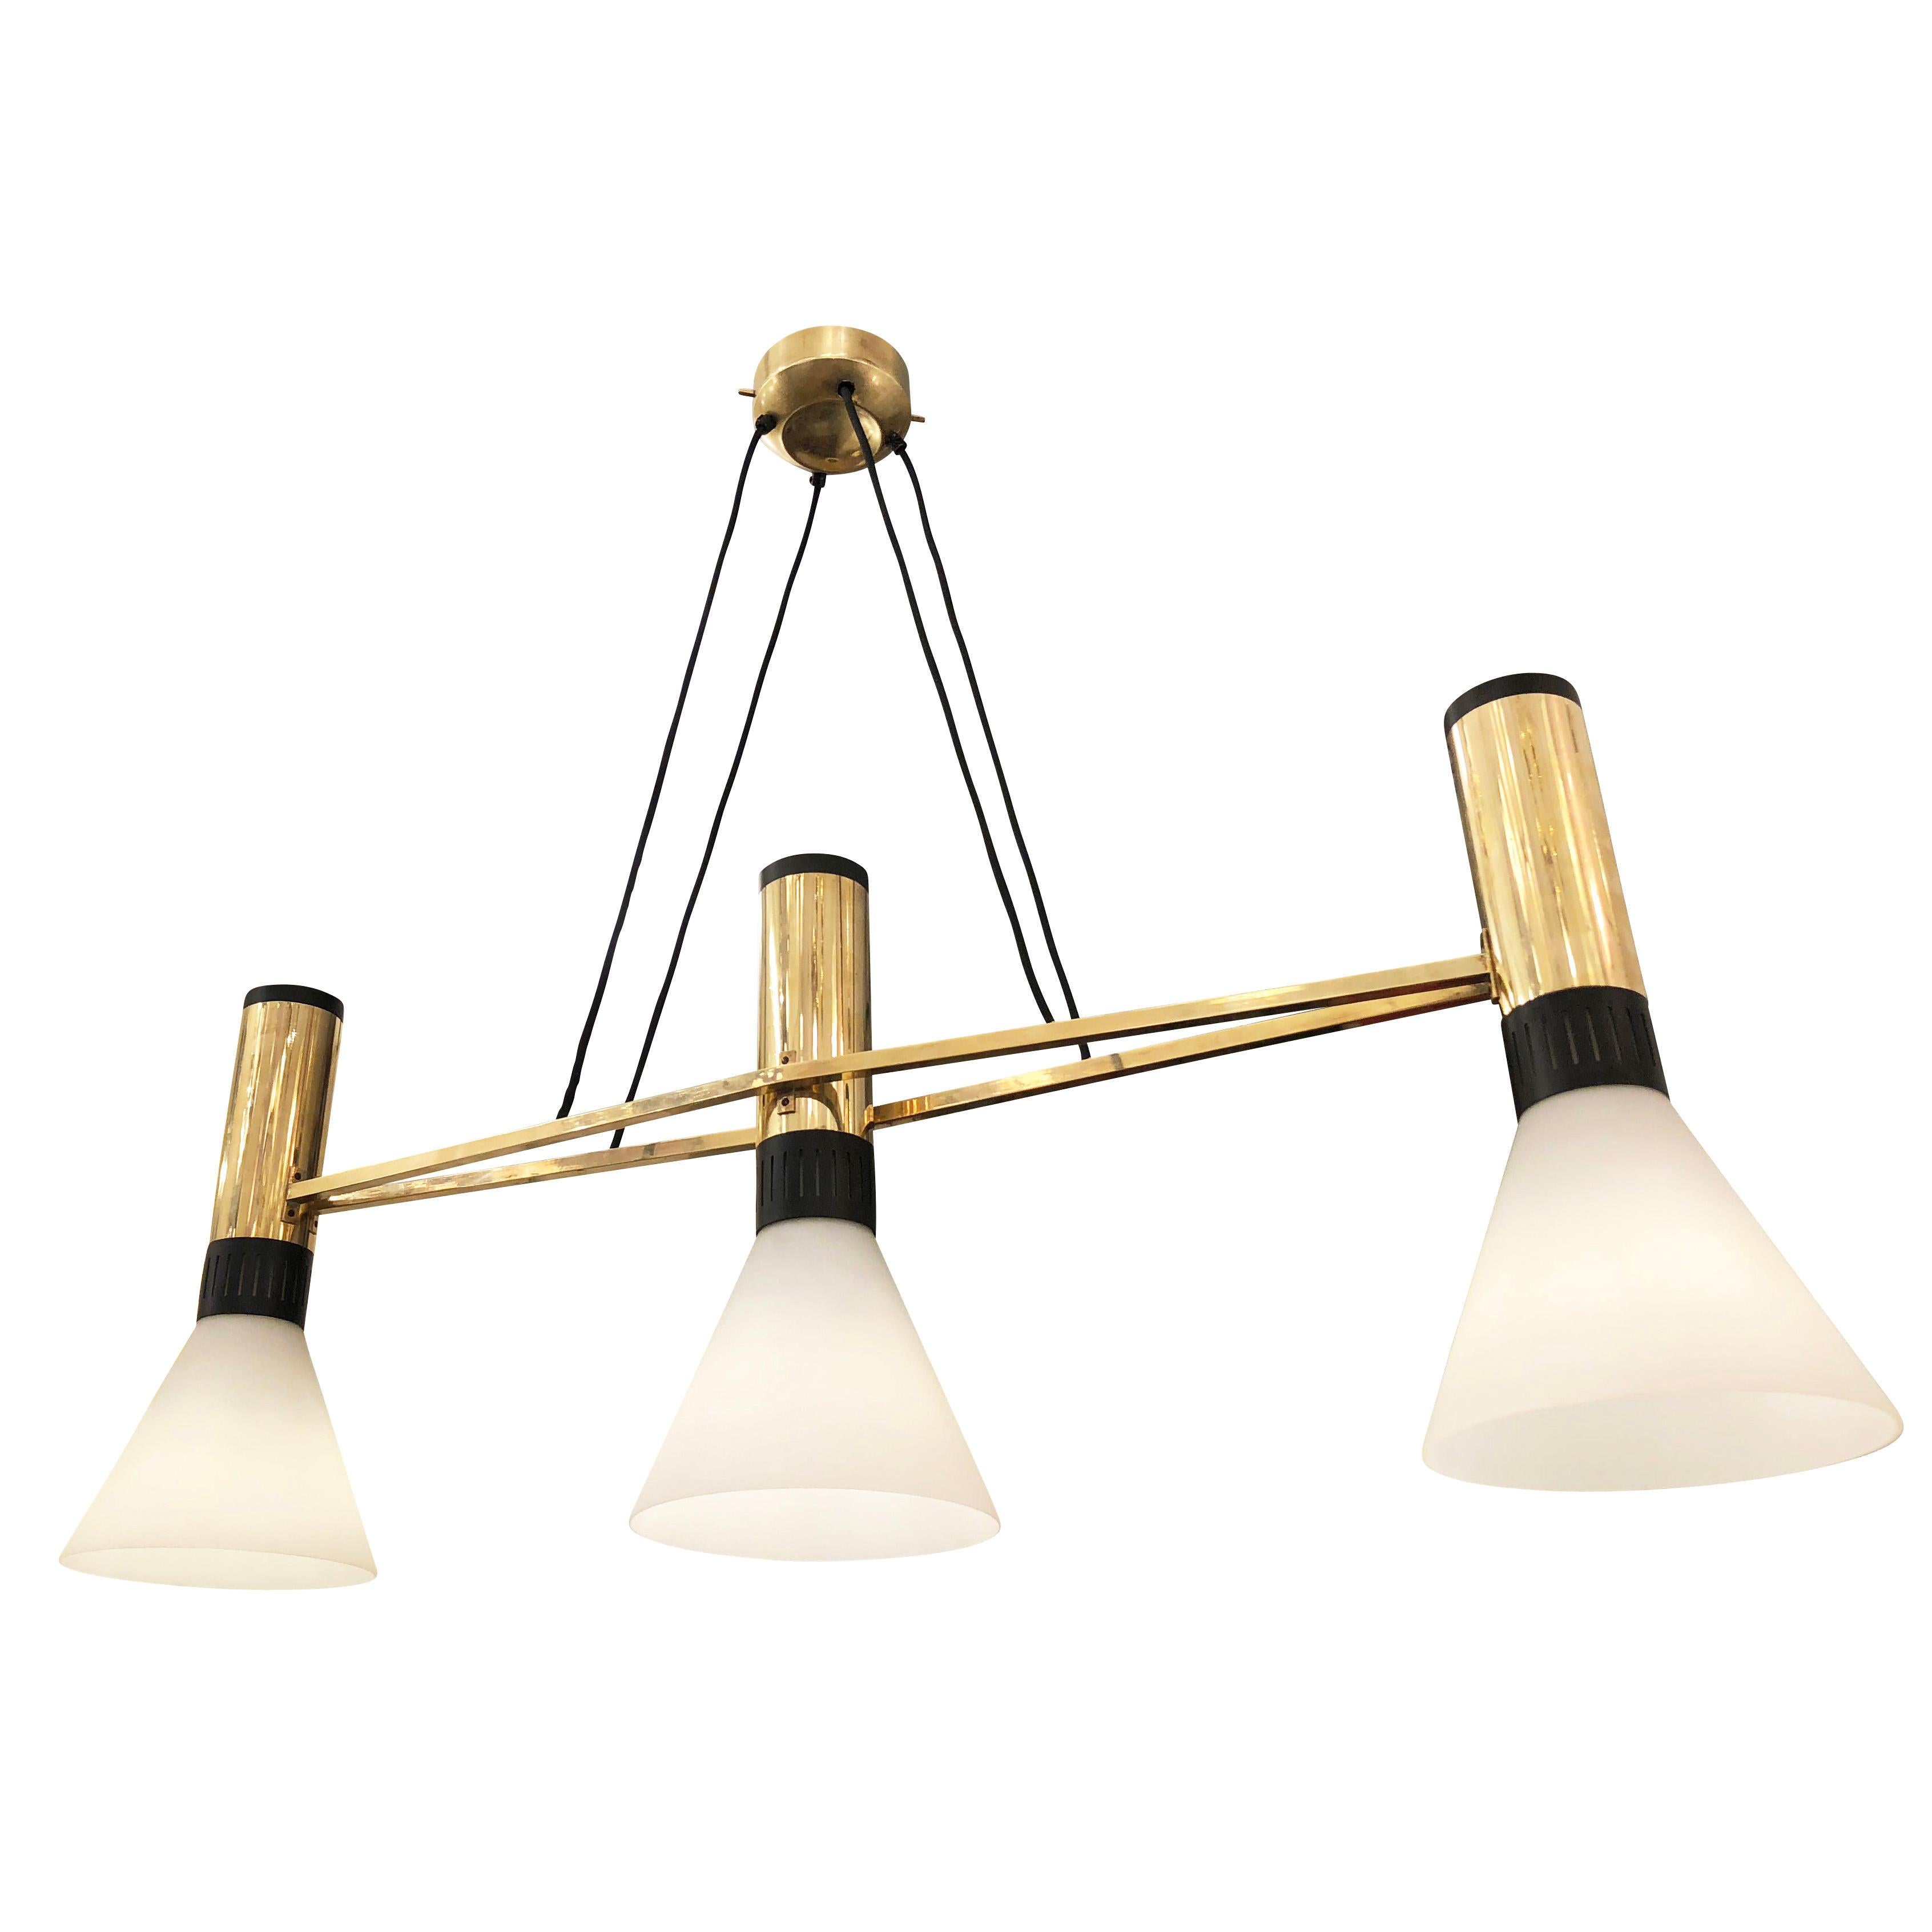 Elongated Stilnovo chandelier with three conical glass shades on a brass frame. Ideal over a dining table. Height is adjustable via the four fabric cords. Holds three E26 bulbs. Original label still present.

Condition: Excellent vintage